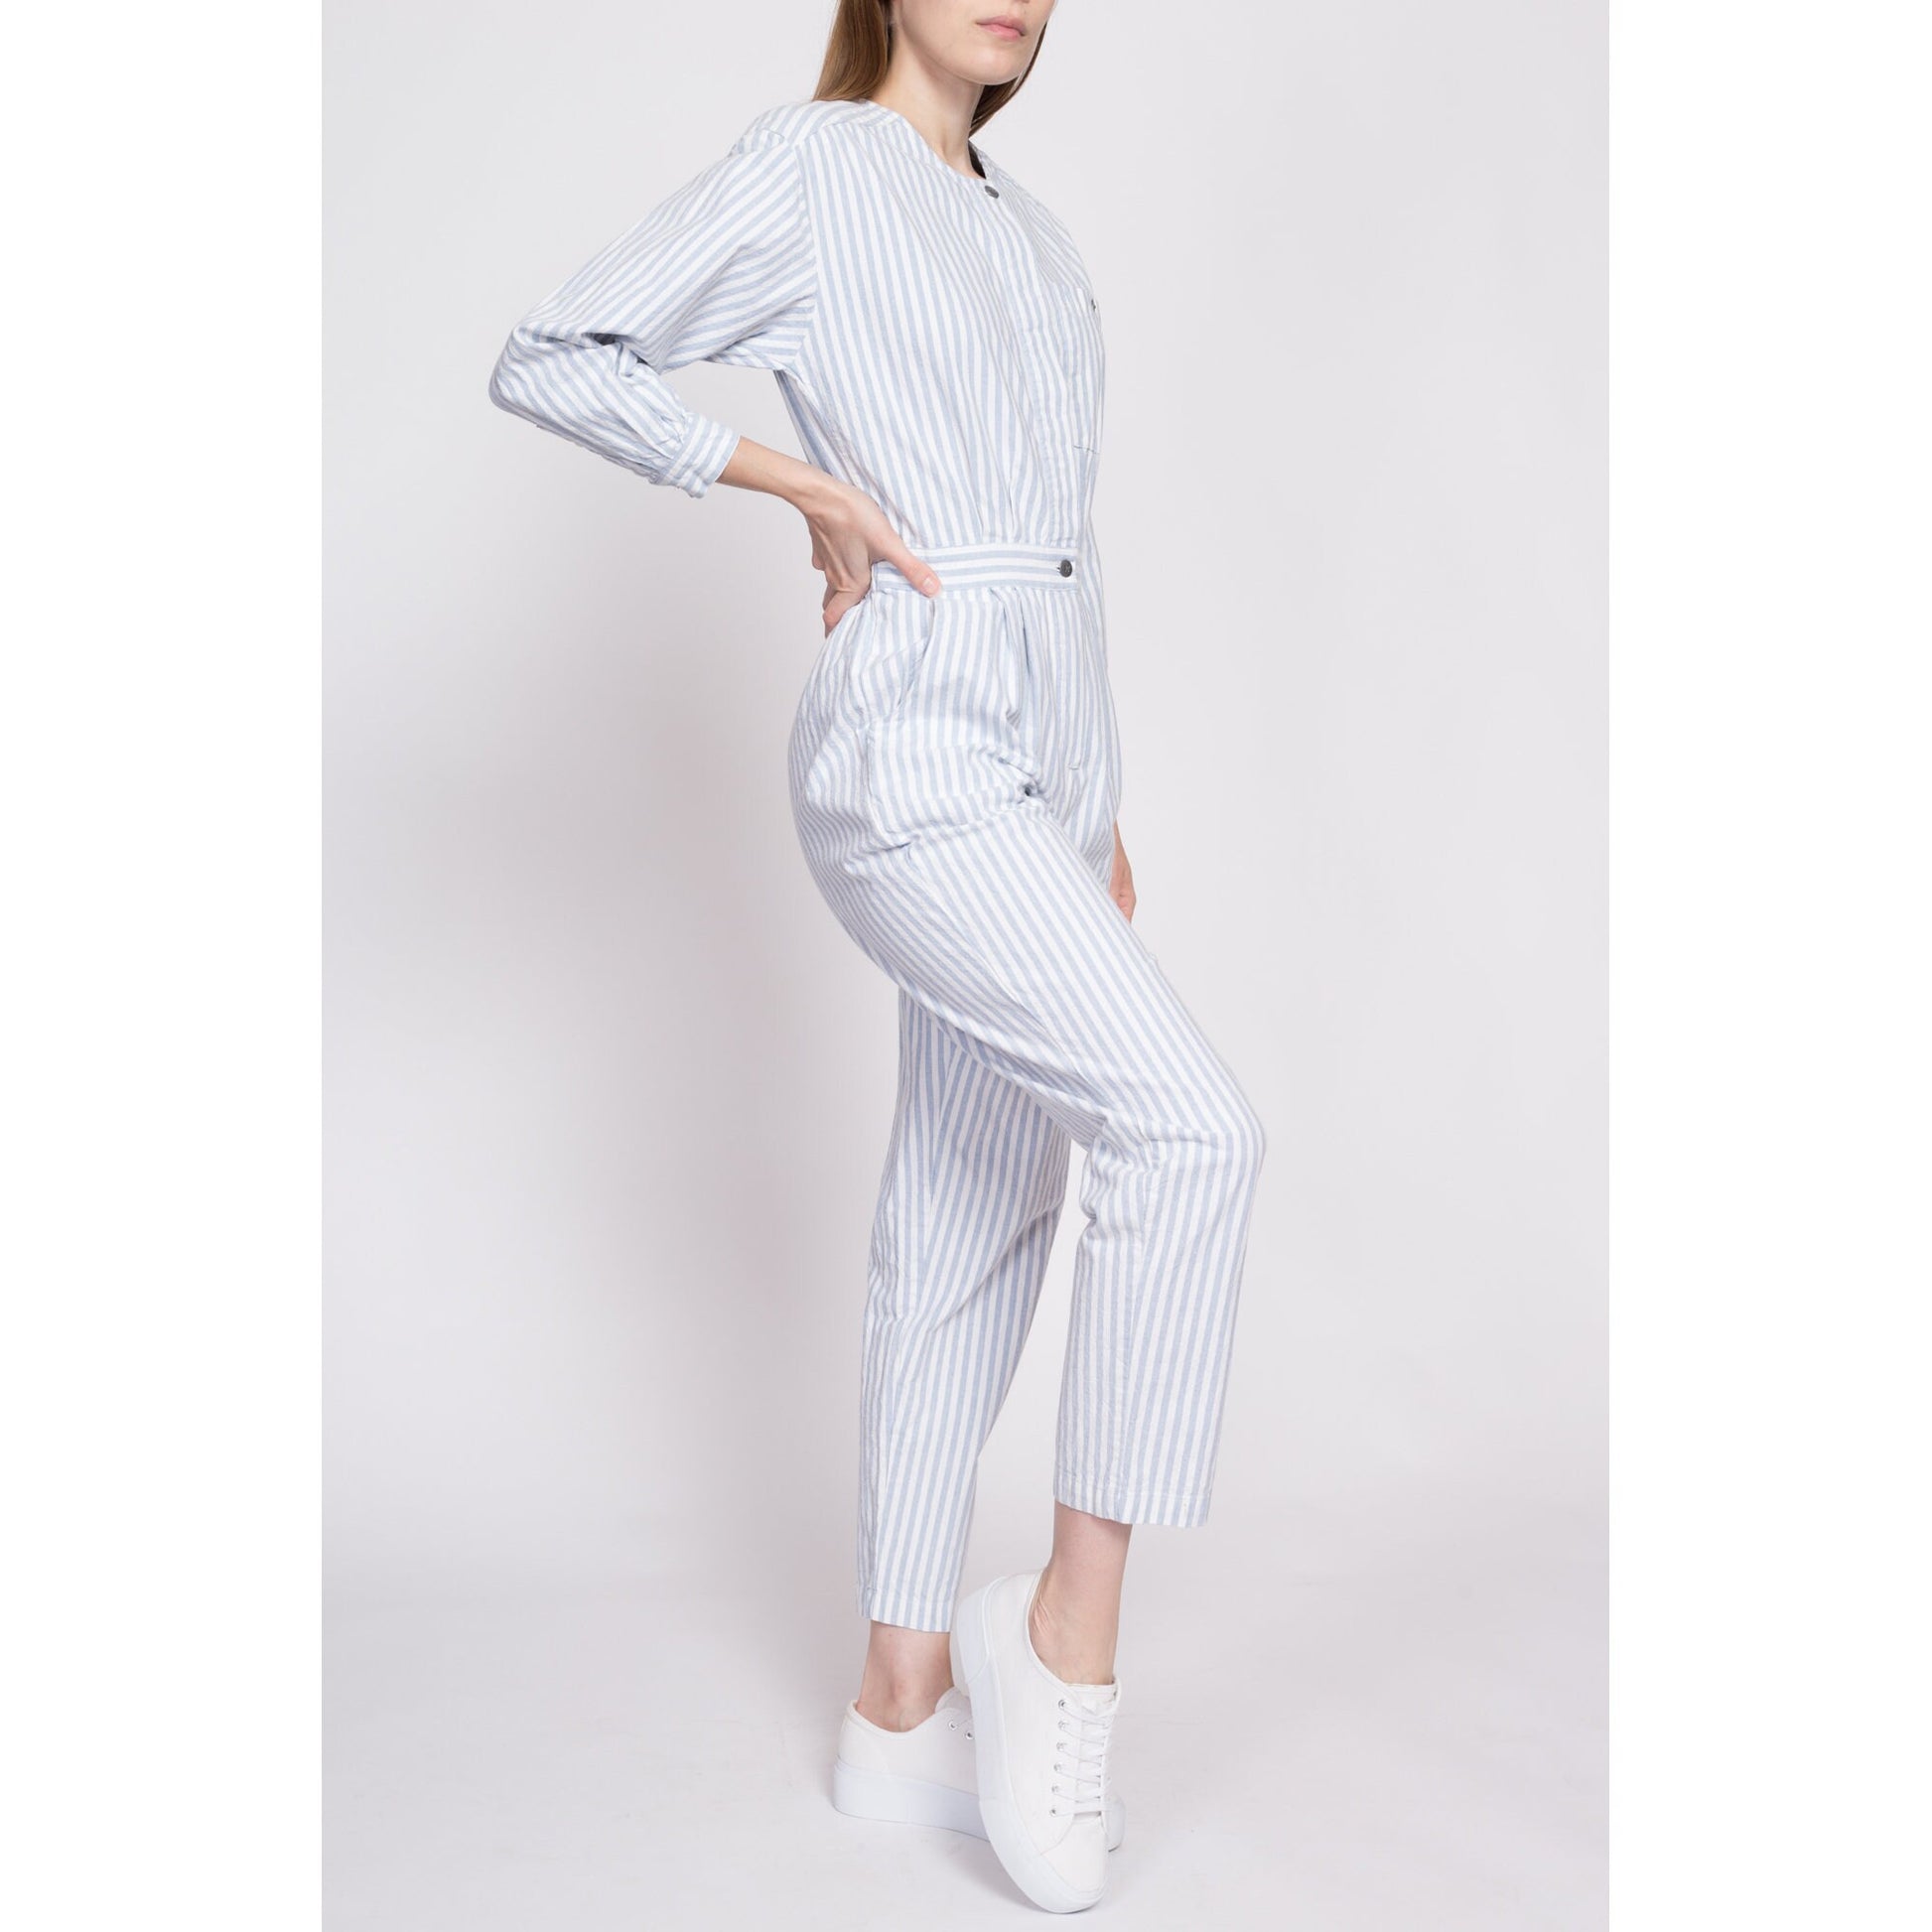 80s Eddie Bauer White & Blue Striped Jumpsuit - Petite Small | Vintage Cotton Fitted Waist Button Up Coveralls